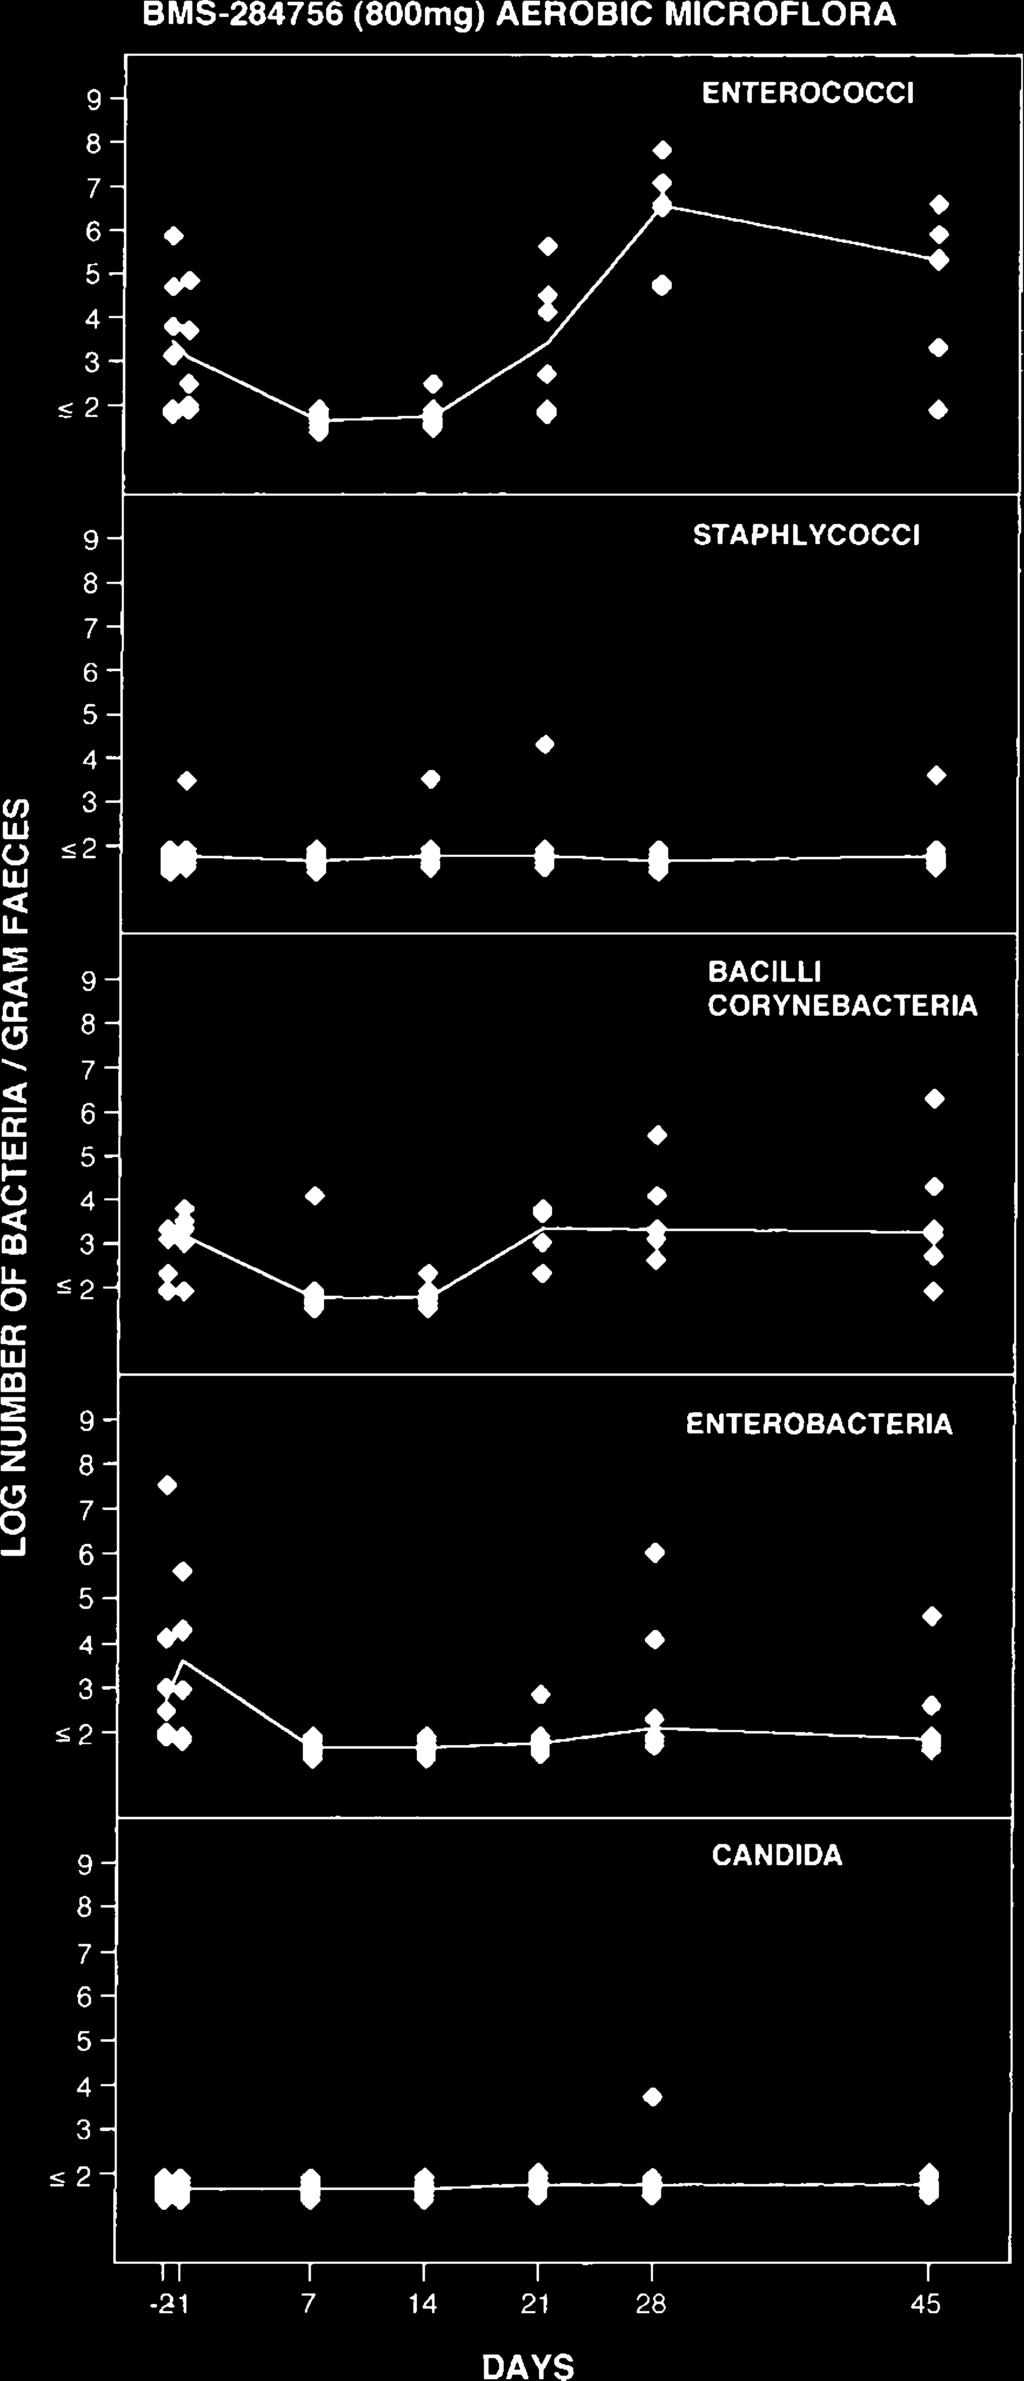 Nord et al Impact of BMS-284756 on normal intestinal microflora 233 Impact of BMS-284756 on the intestinal microflora in subjects receiving 800 mg once daily for 14 days Enterococci, bacilli and